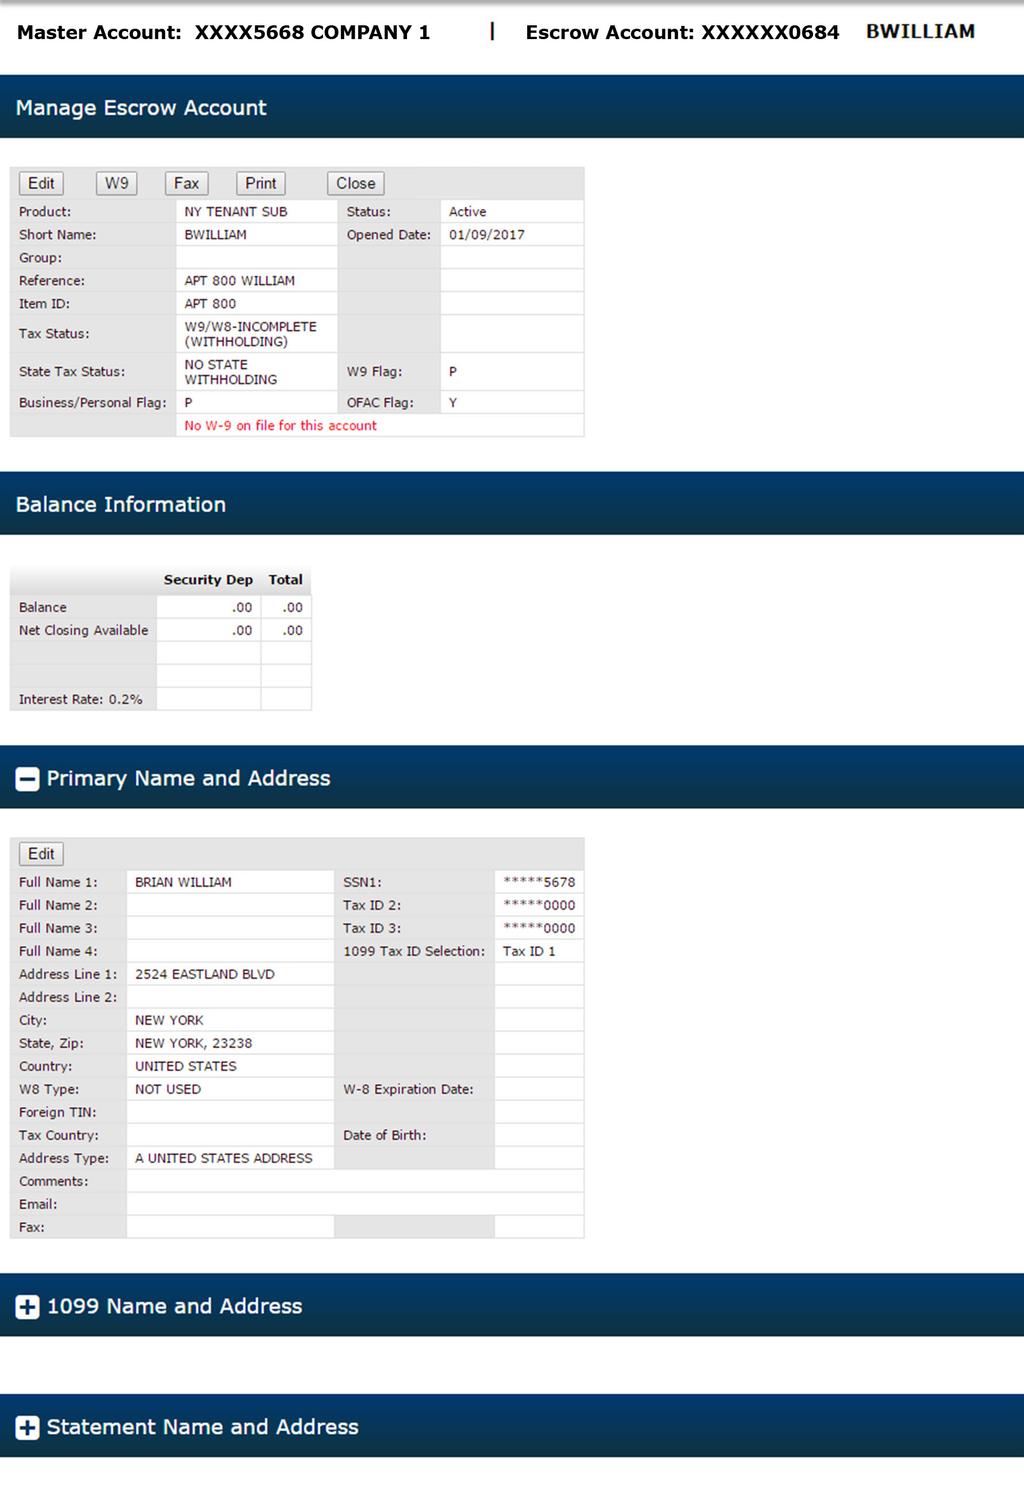 The Escrow Account Details screen displays.